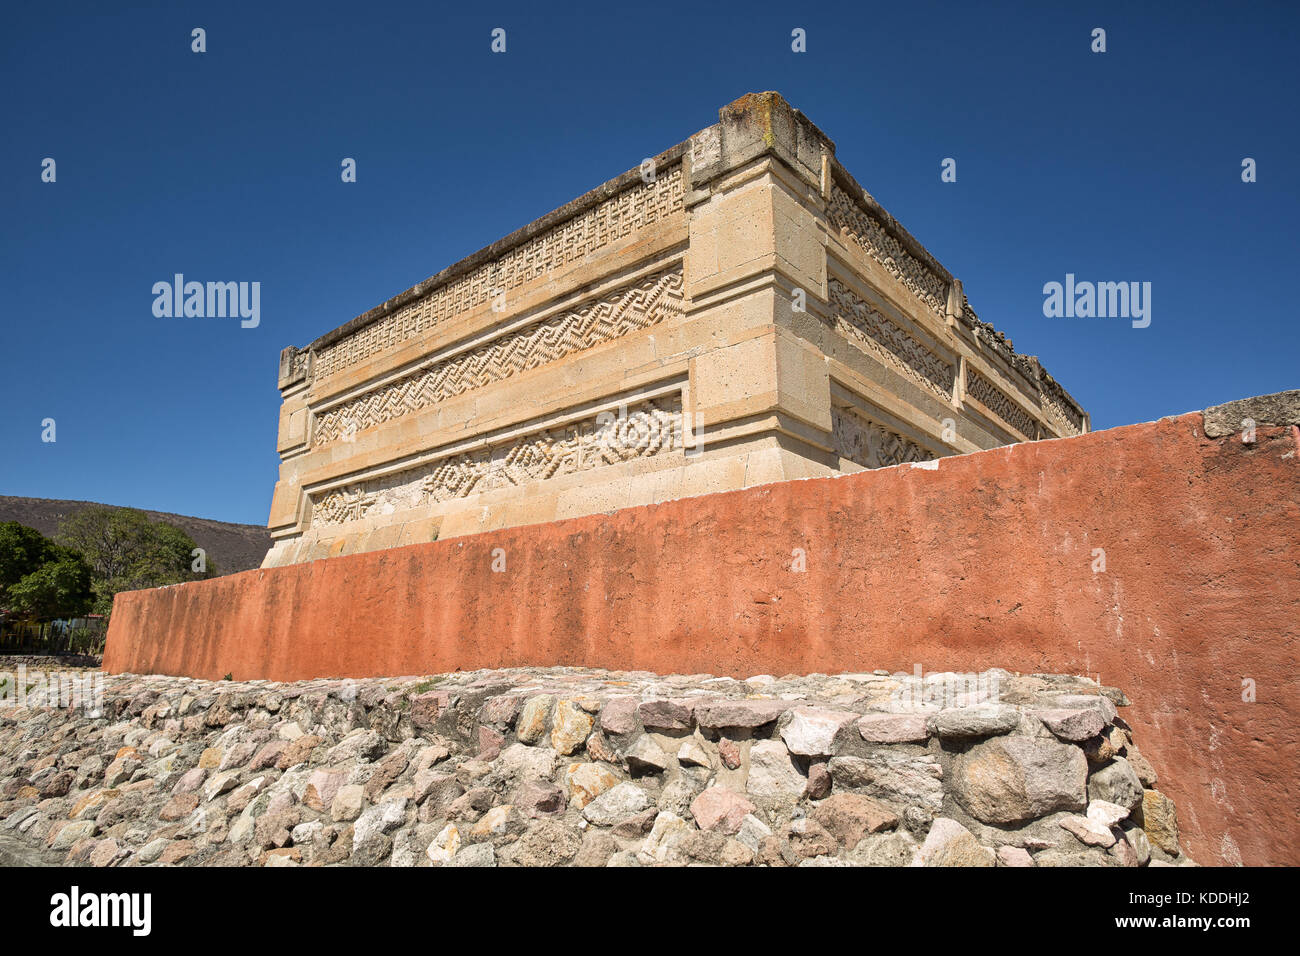 elaborate and intricate mosaic fretwork and geometric designs that cover tombs, panels, friezes and even entire walls at Mitla Mexico Stock Photo